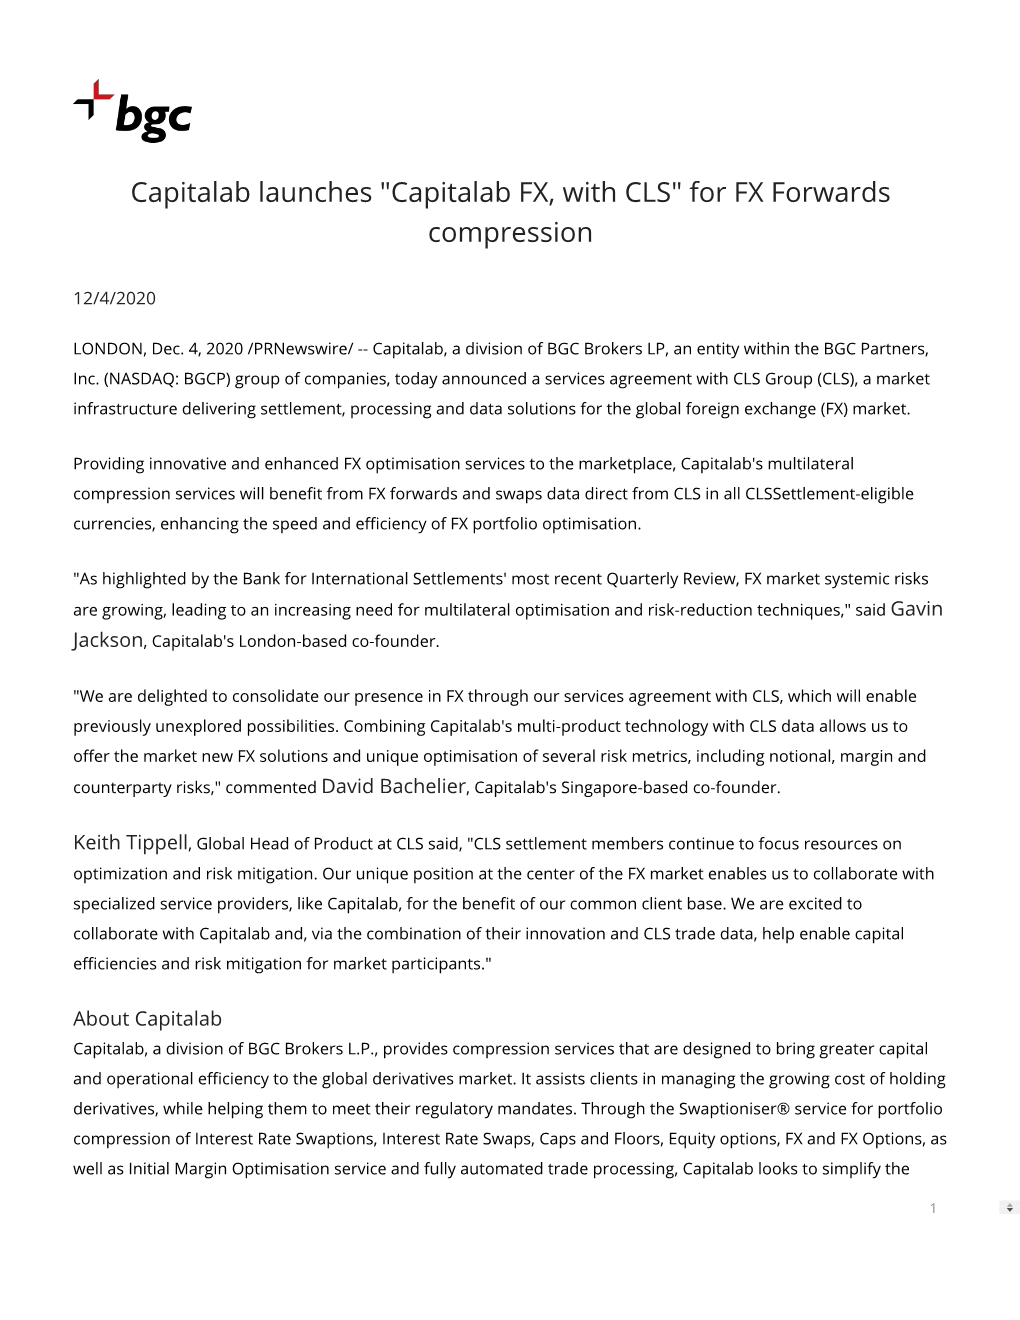 "Capitalab FX, with CLS" for FX Forwards Compression